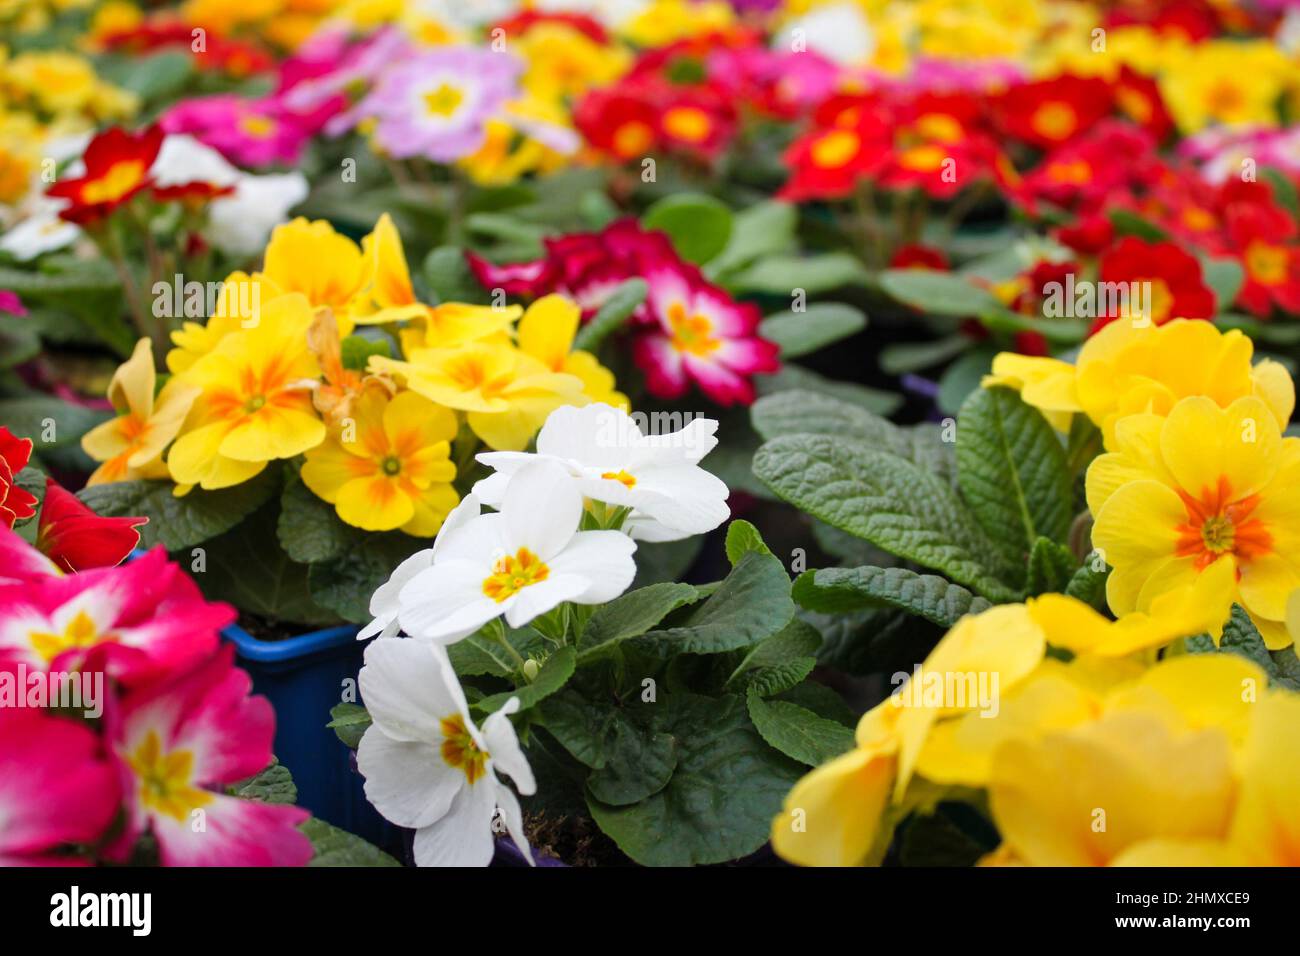 Close-up of a variety of multicolored primrose flowers, also known as cowslip, selective focus. Stock Photo